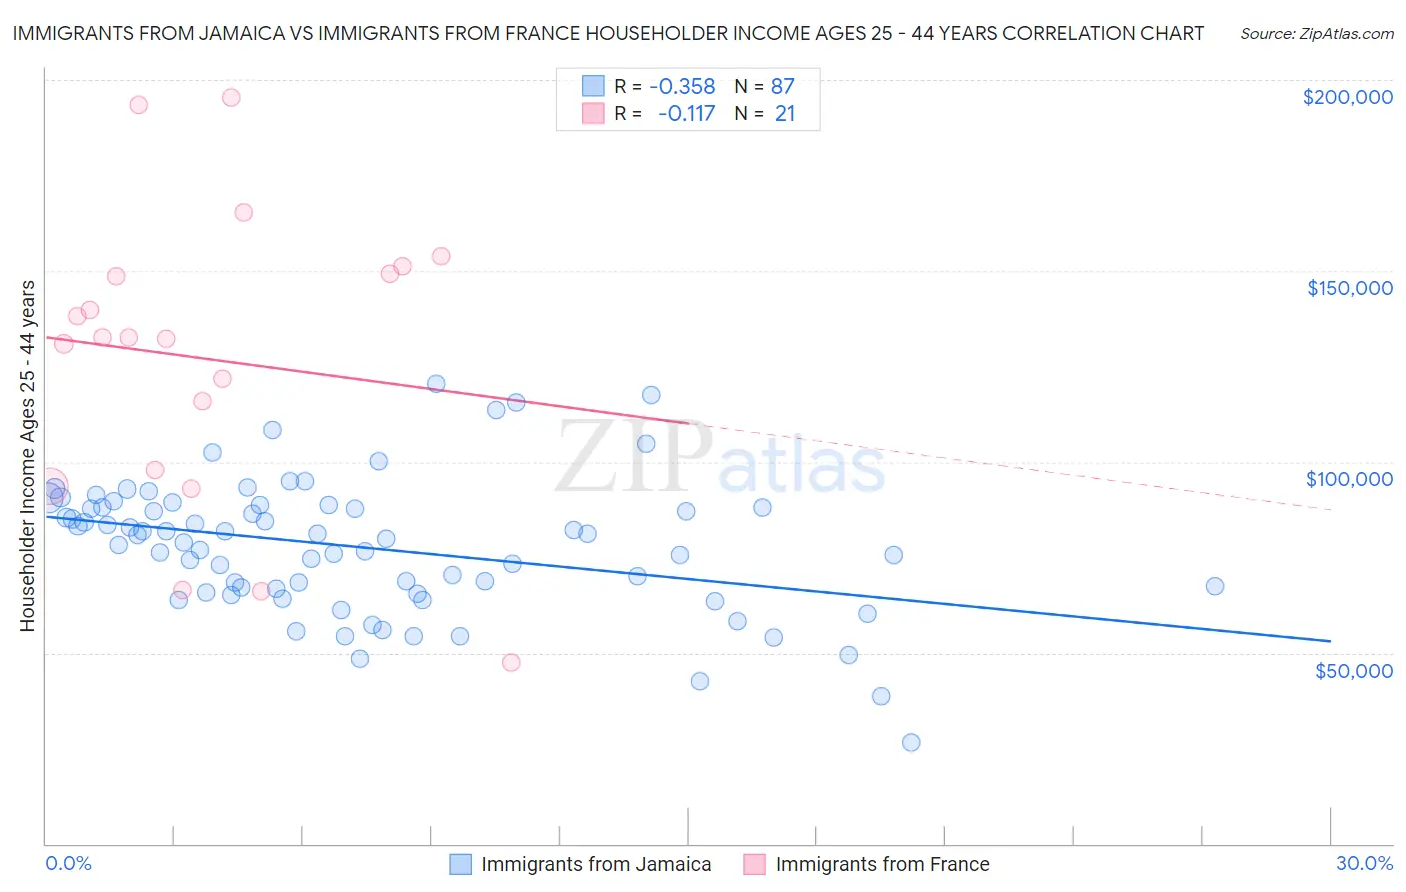 Immigrants from Jamaica vs Immigrants from France Householder Income Ages 25 - 44 years